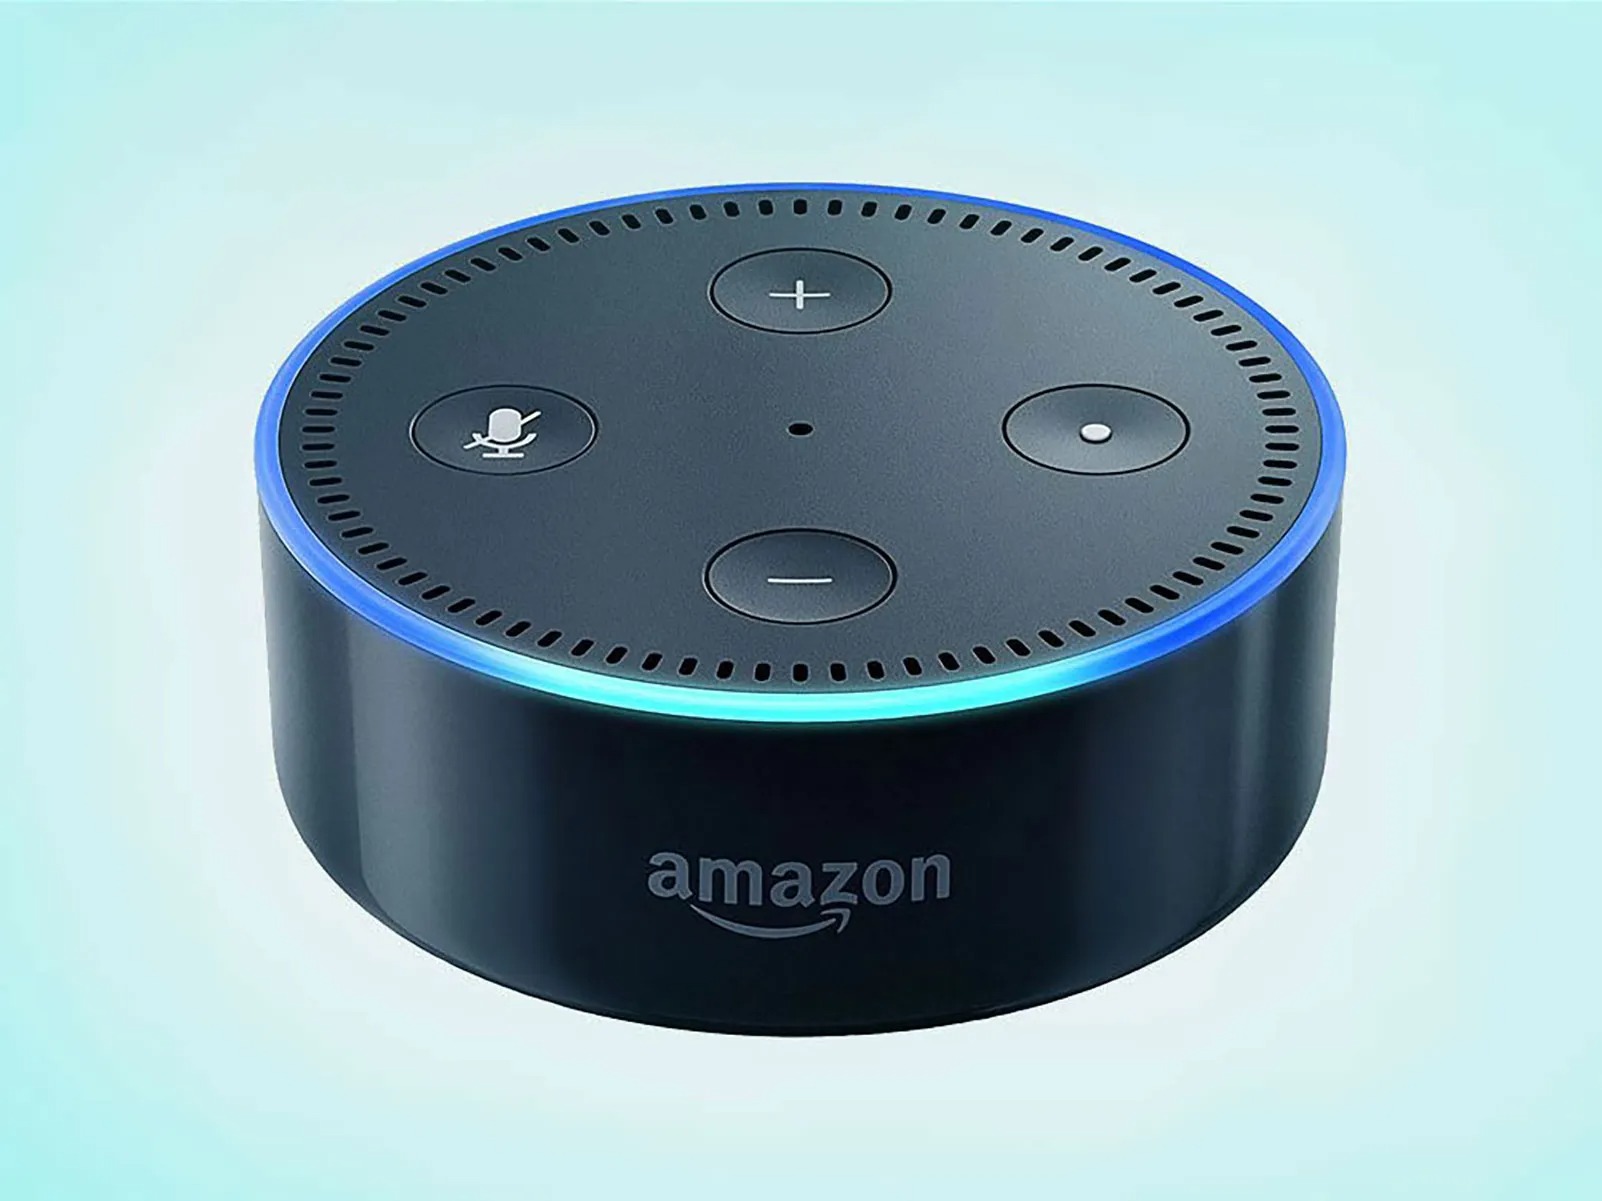 Is Alexa Safe To Use?